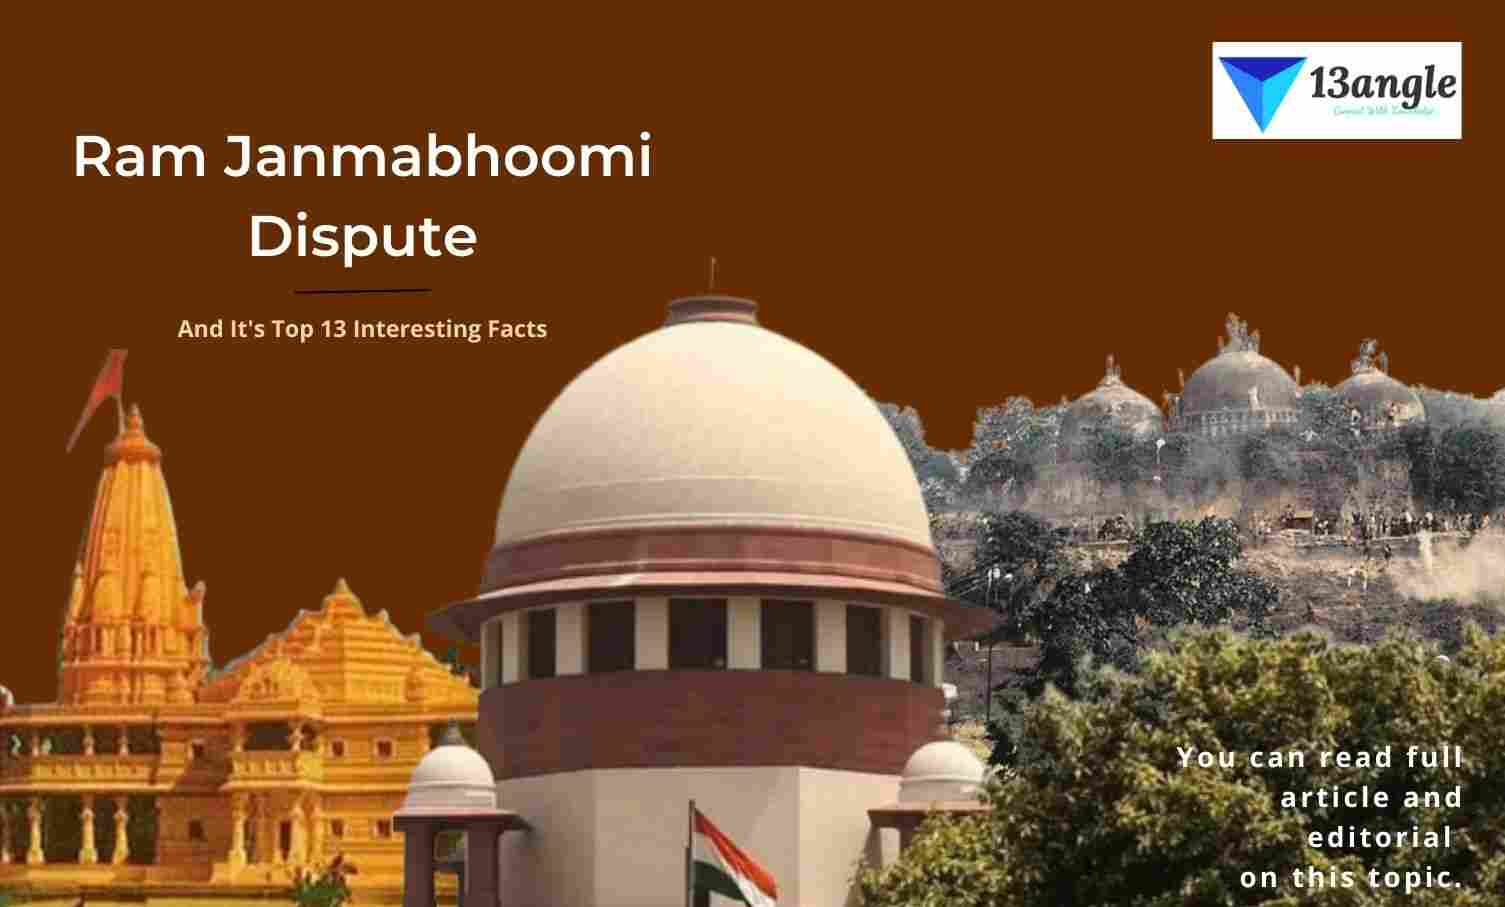 Ram Janmabhoomi Dispute And It's Top 13 Interesting Facts- 13angle.com